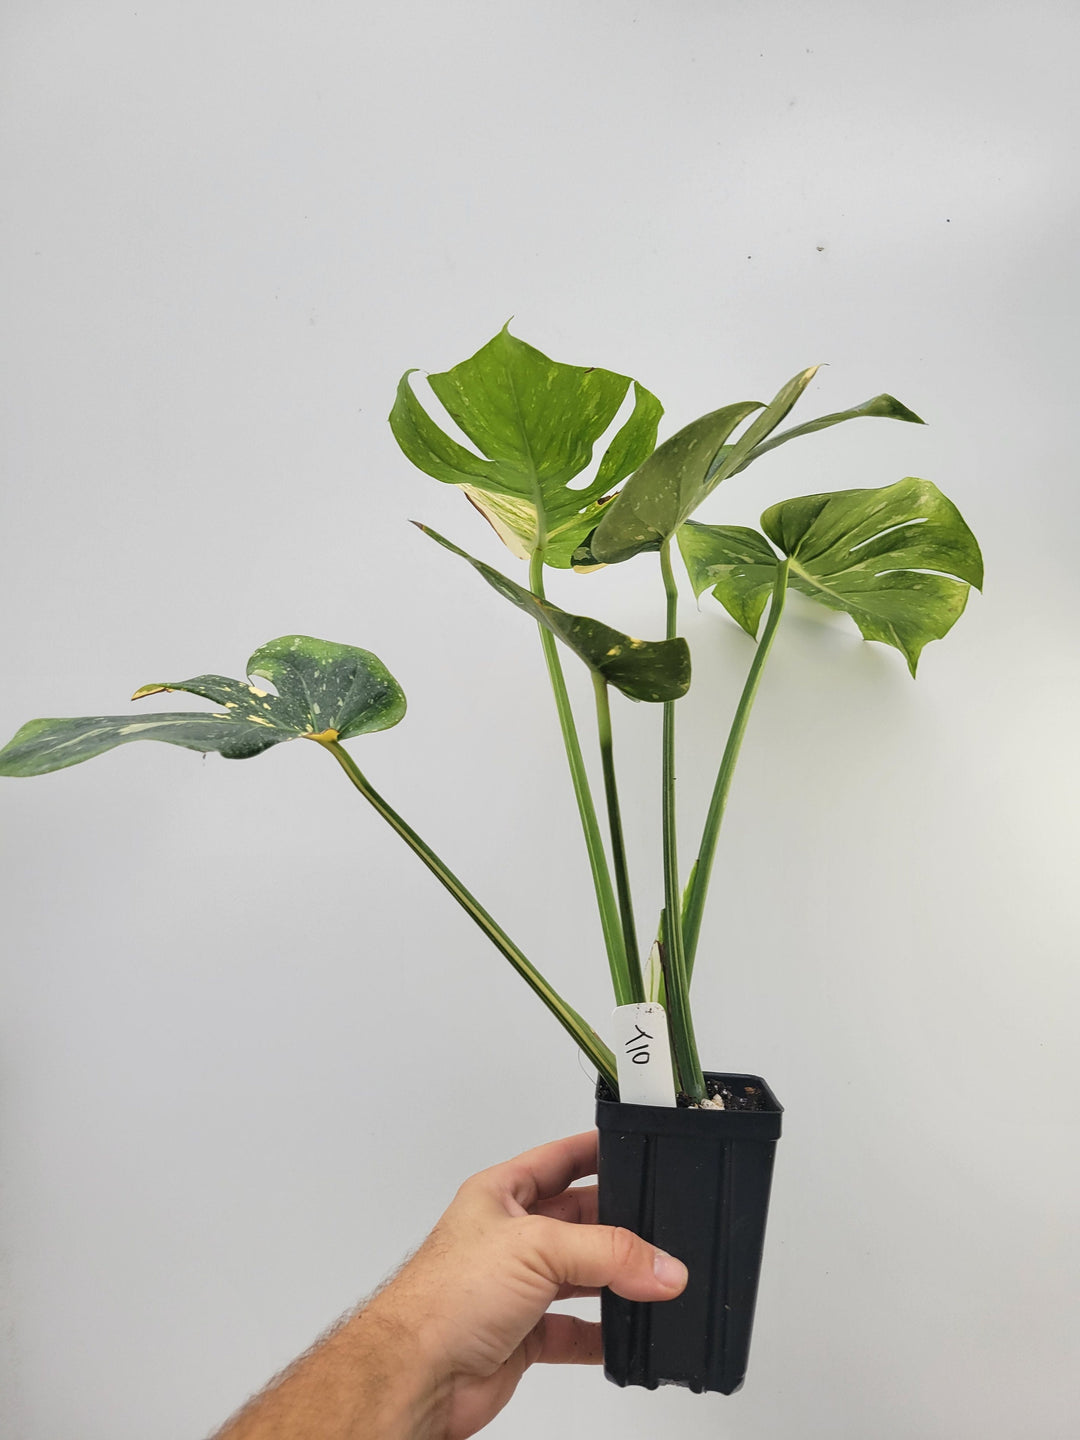 Monstera Thai Constellation, Nice XL size,  Highly variegated, Japanese Cultivar, exact plant pictured  US Seller #T10